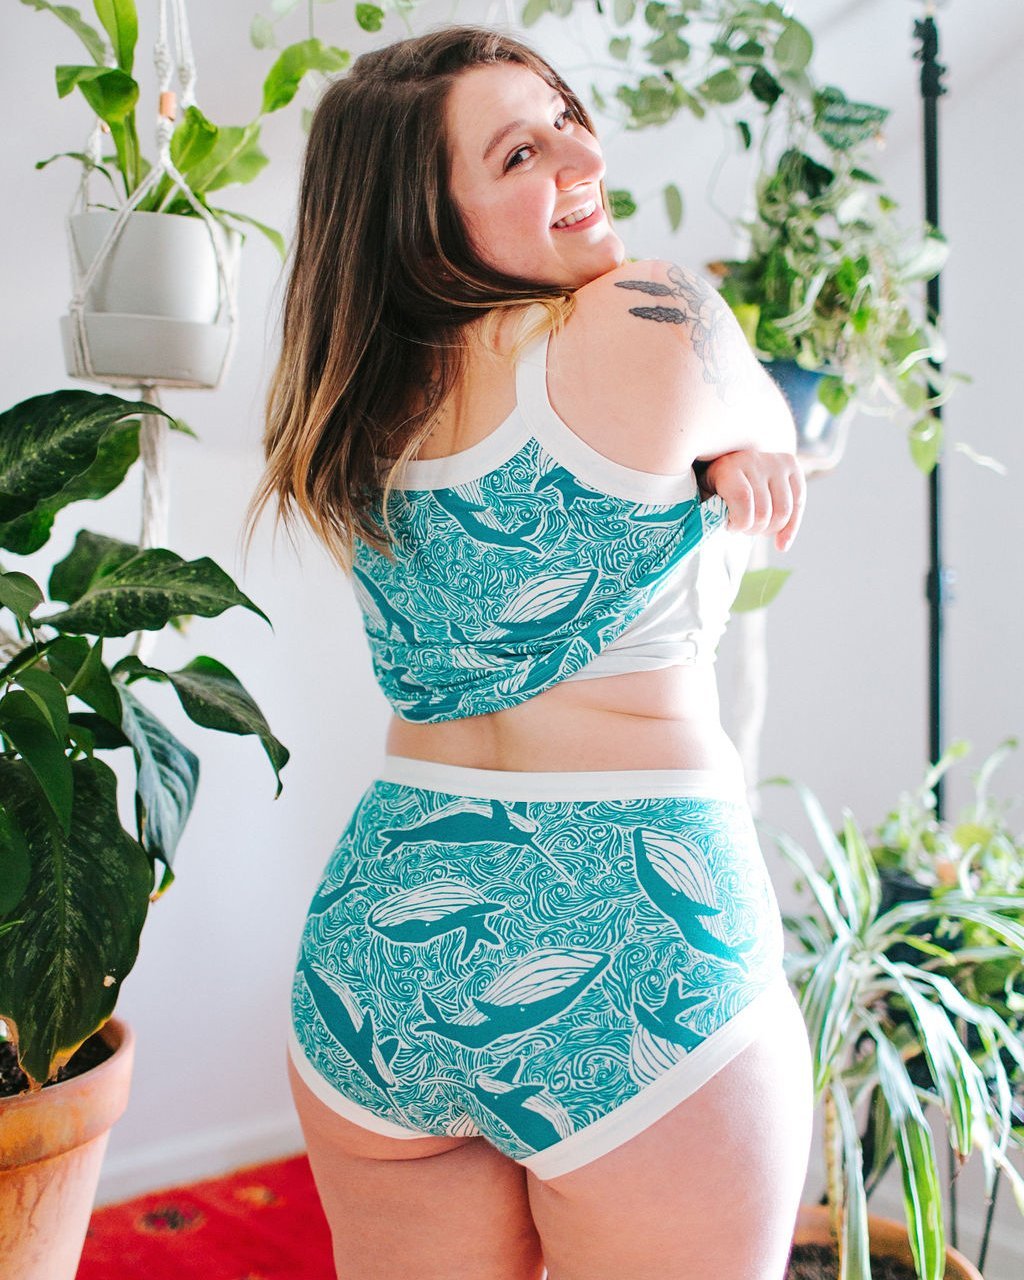 Model smiling over her shoulder wearing Thunderpants organic cotton Original style underwear, showing a wedgie-free bum, and a Camisole in our Marine Whale print: turquoise whales and ocean all over print.